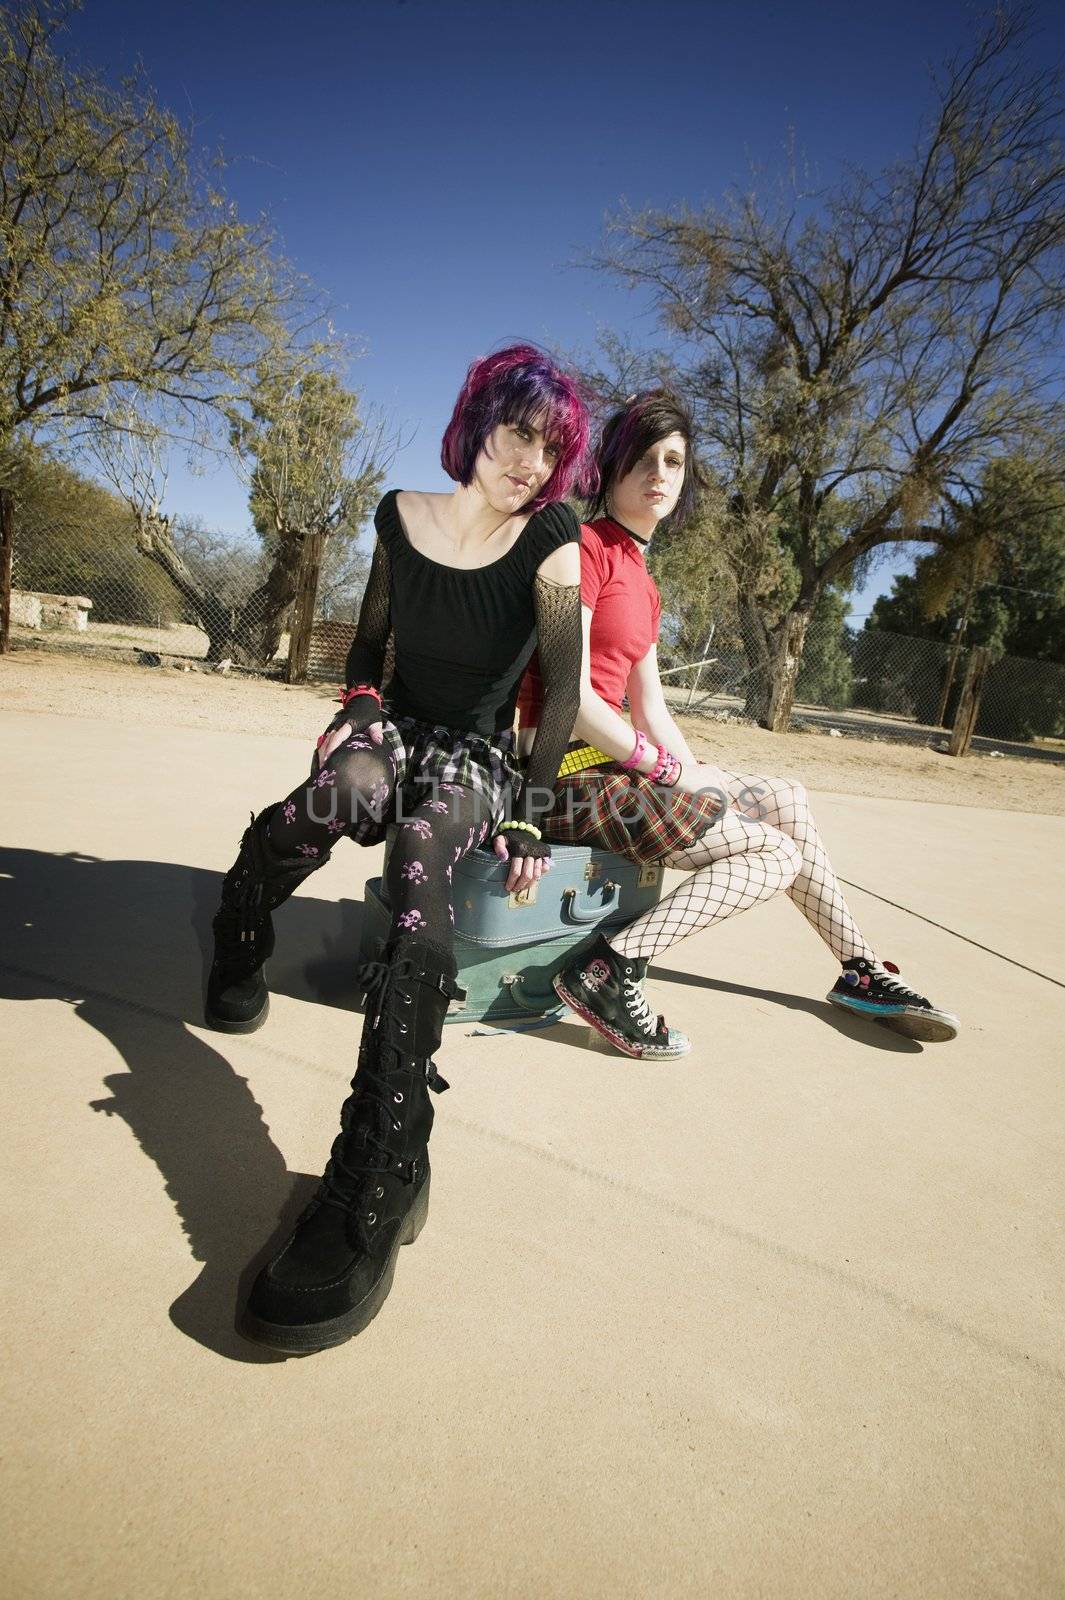 Two Punk Girls Sitting on Suitcases by Creatista